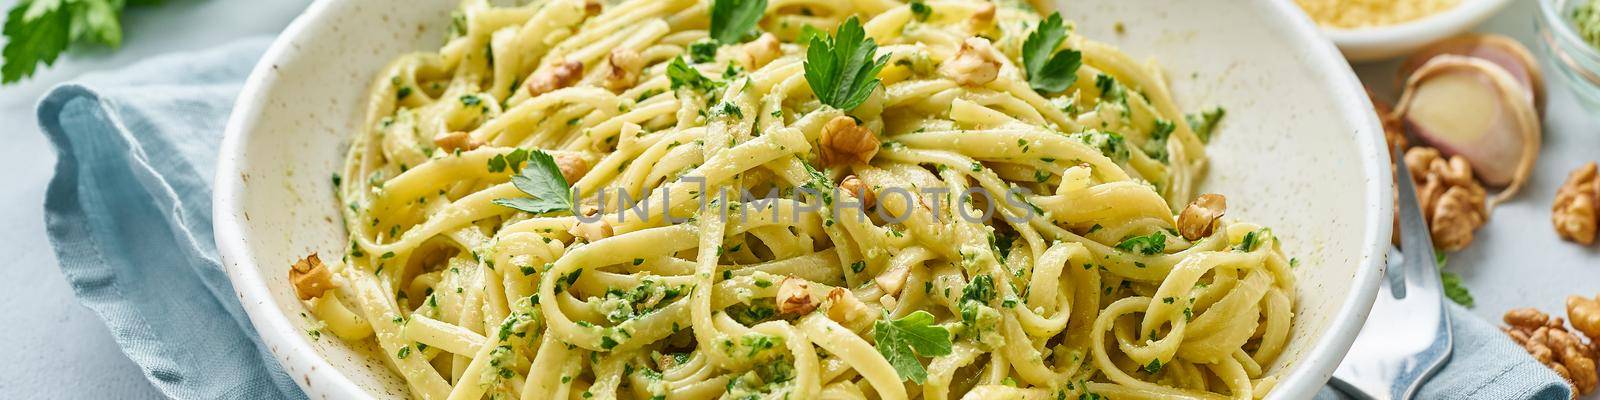 Banner with pesto pasta, bavette with walnuts, parsley, garlic, nuts, olive oil. Side view, long side, blue background